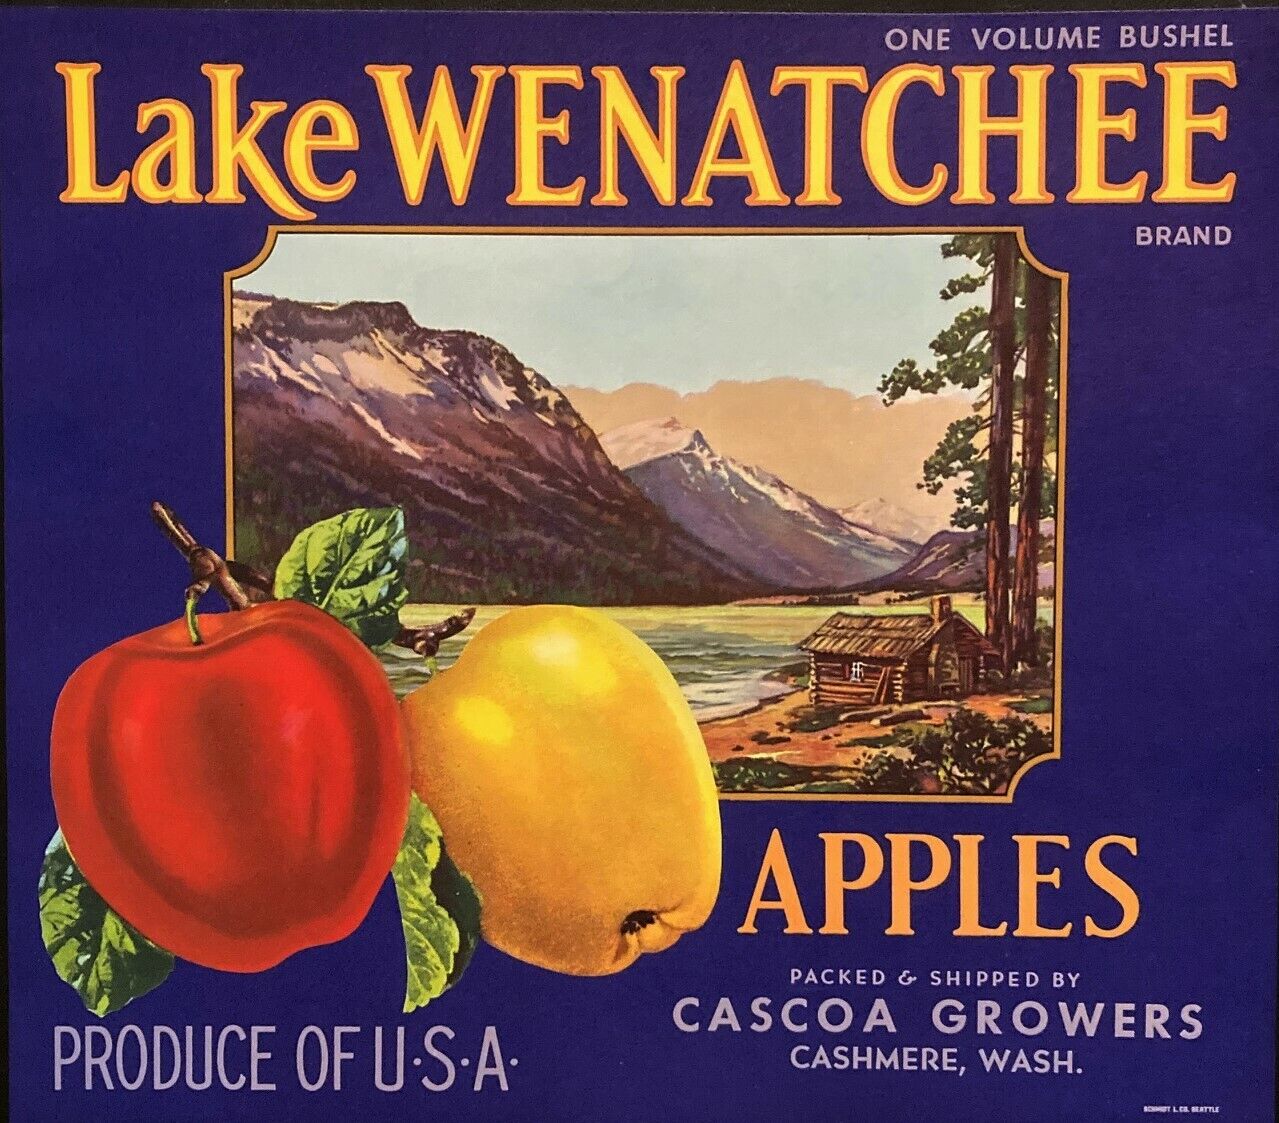 1940's Lake Wenatchee Blue Cascoa Growers Crate Label – Cashmere, Wash. “USA”